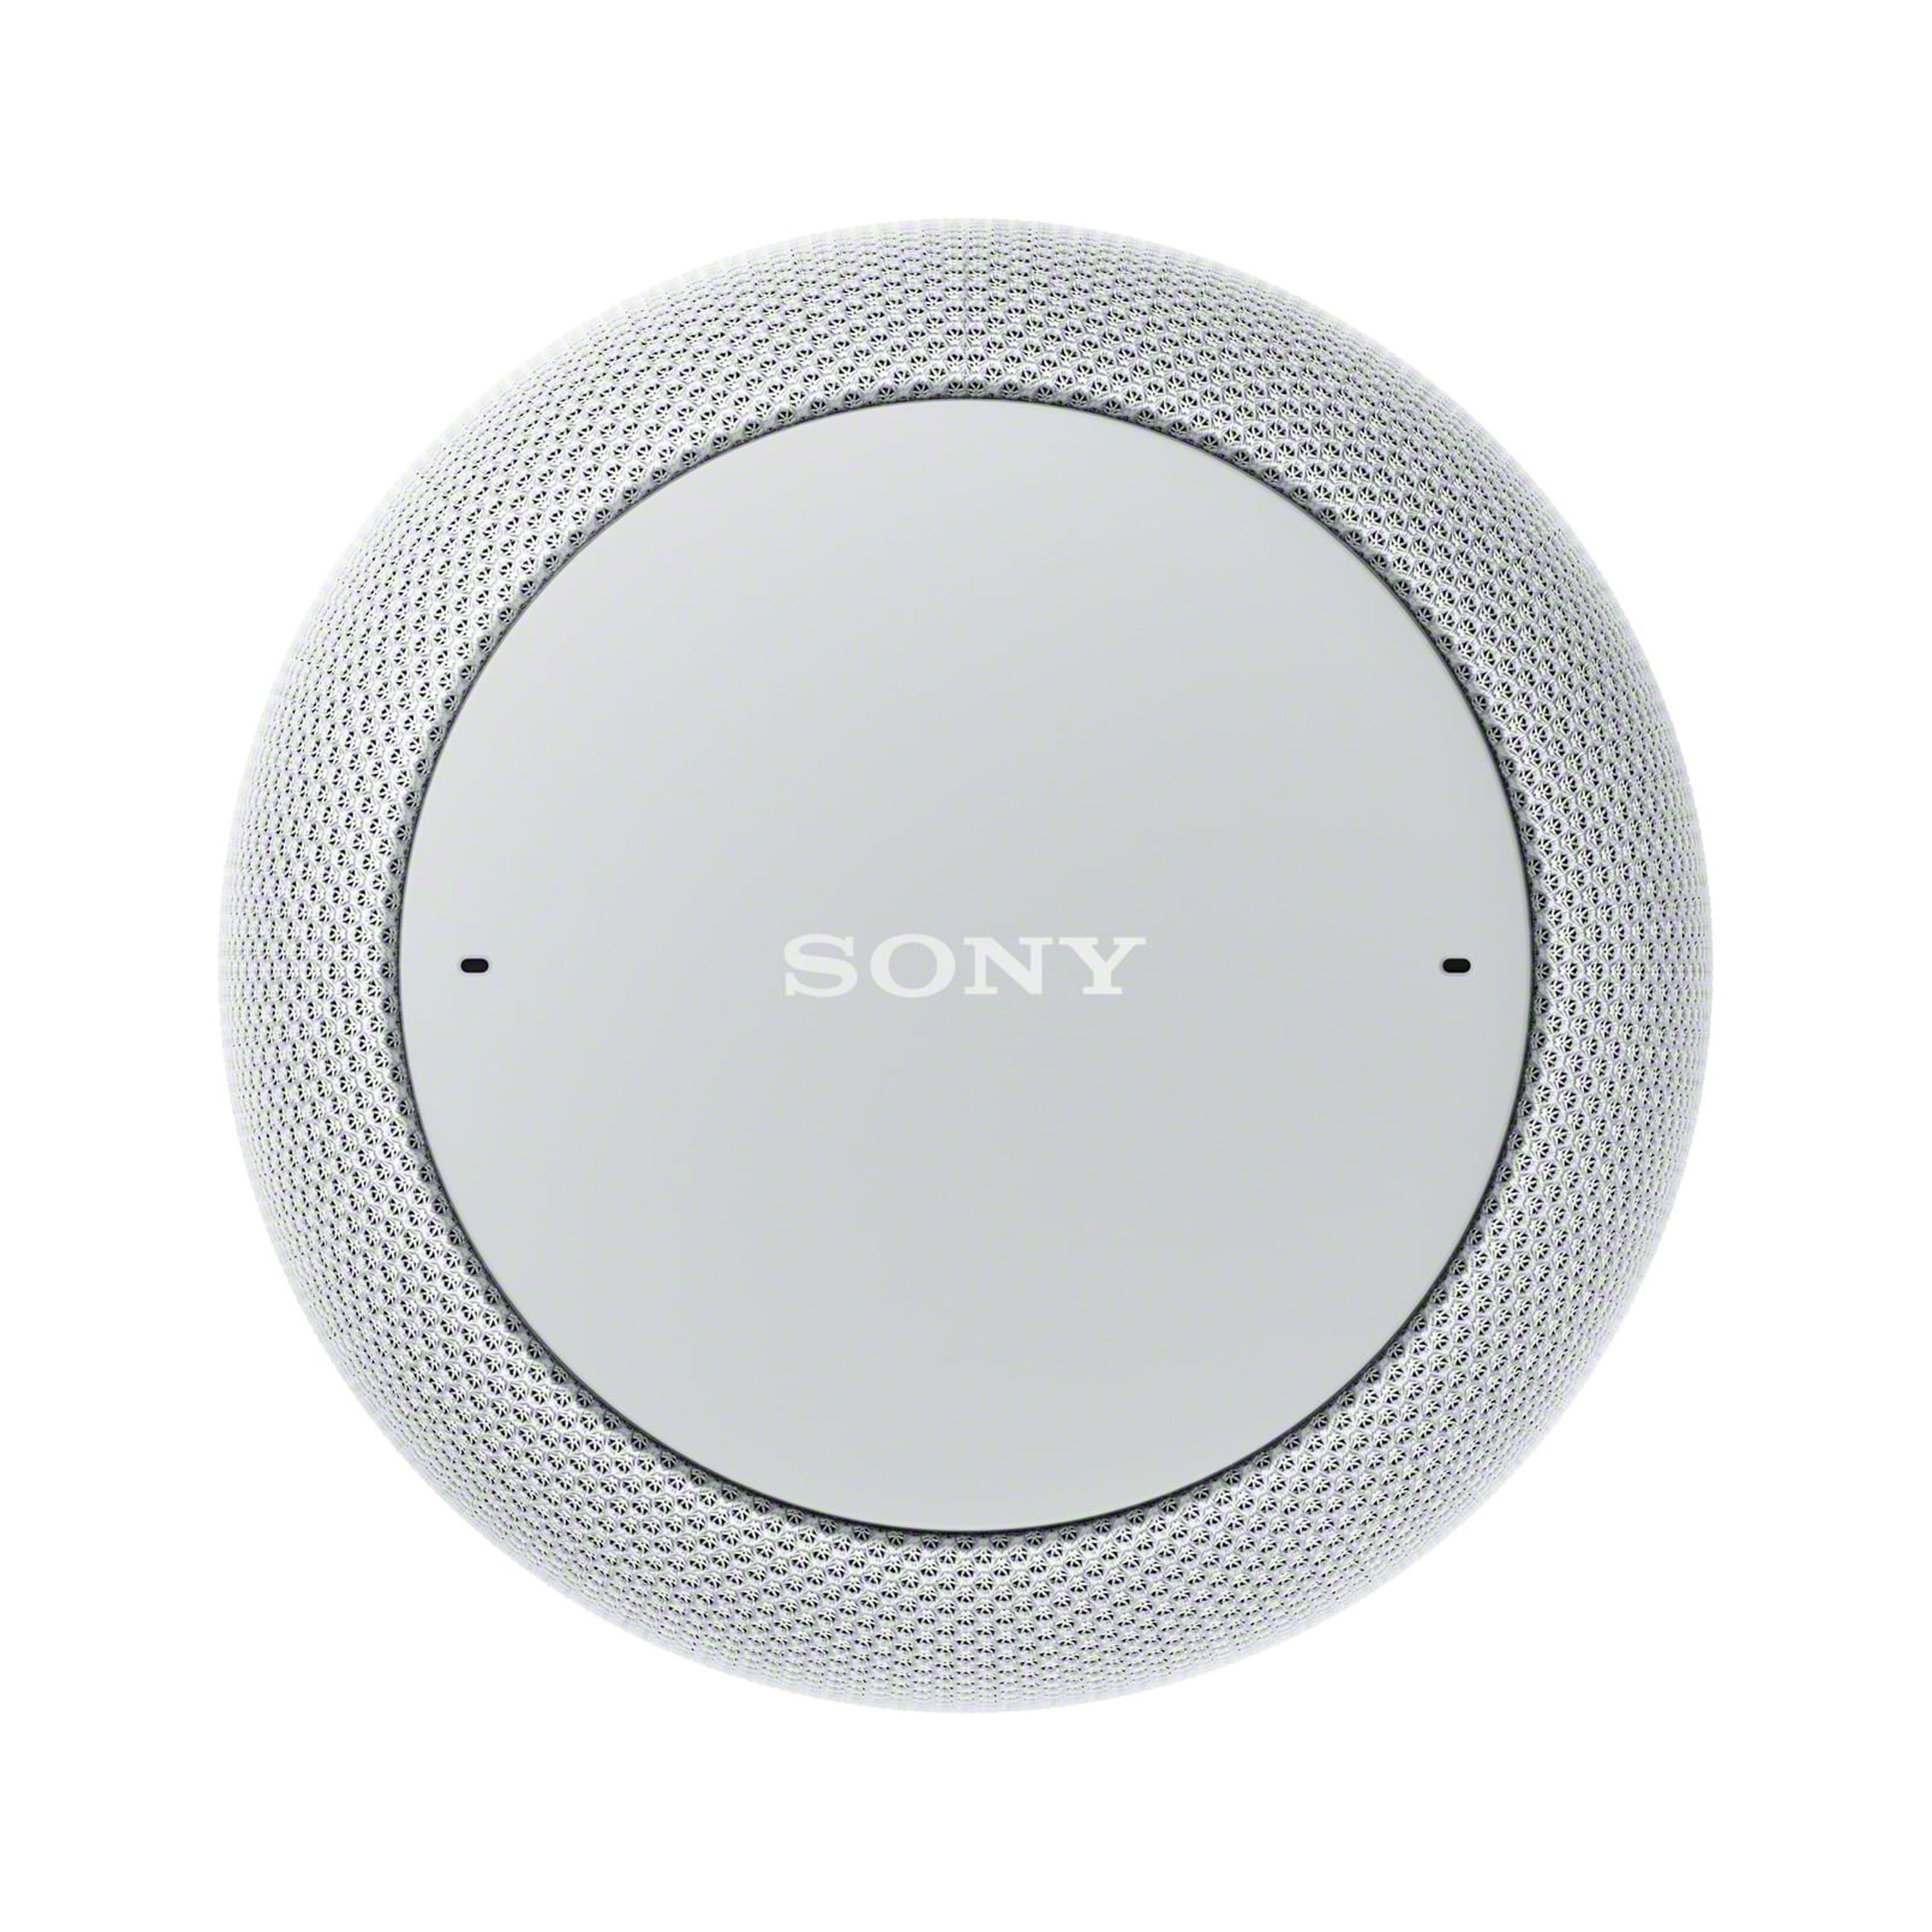 Sony Smart Speaker LFS50G with Google Assistant Built In- White - image 3 of 10